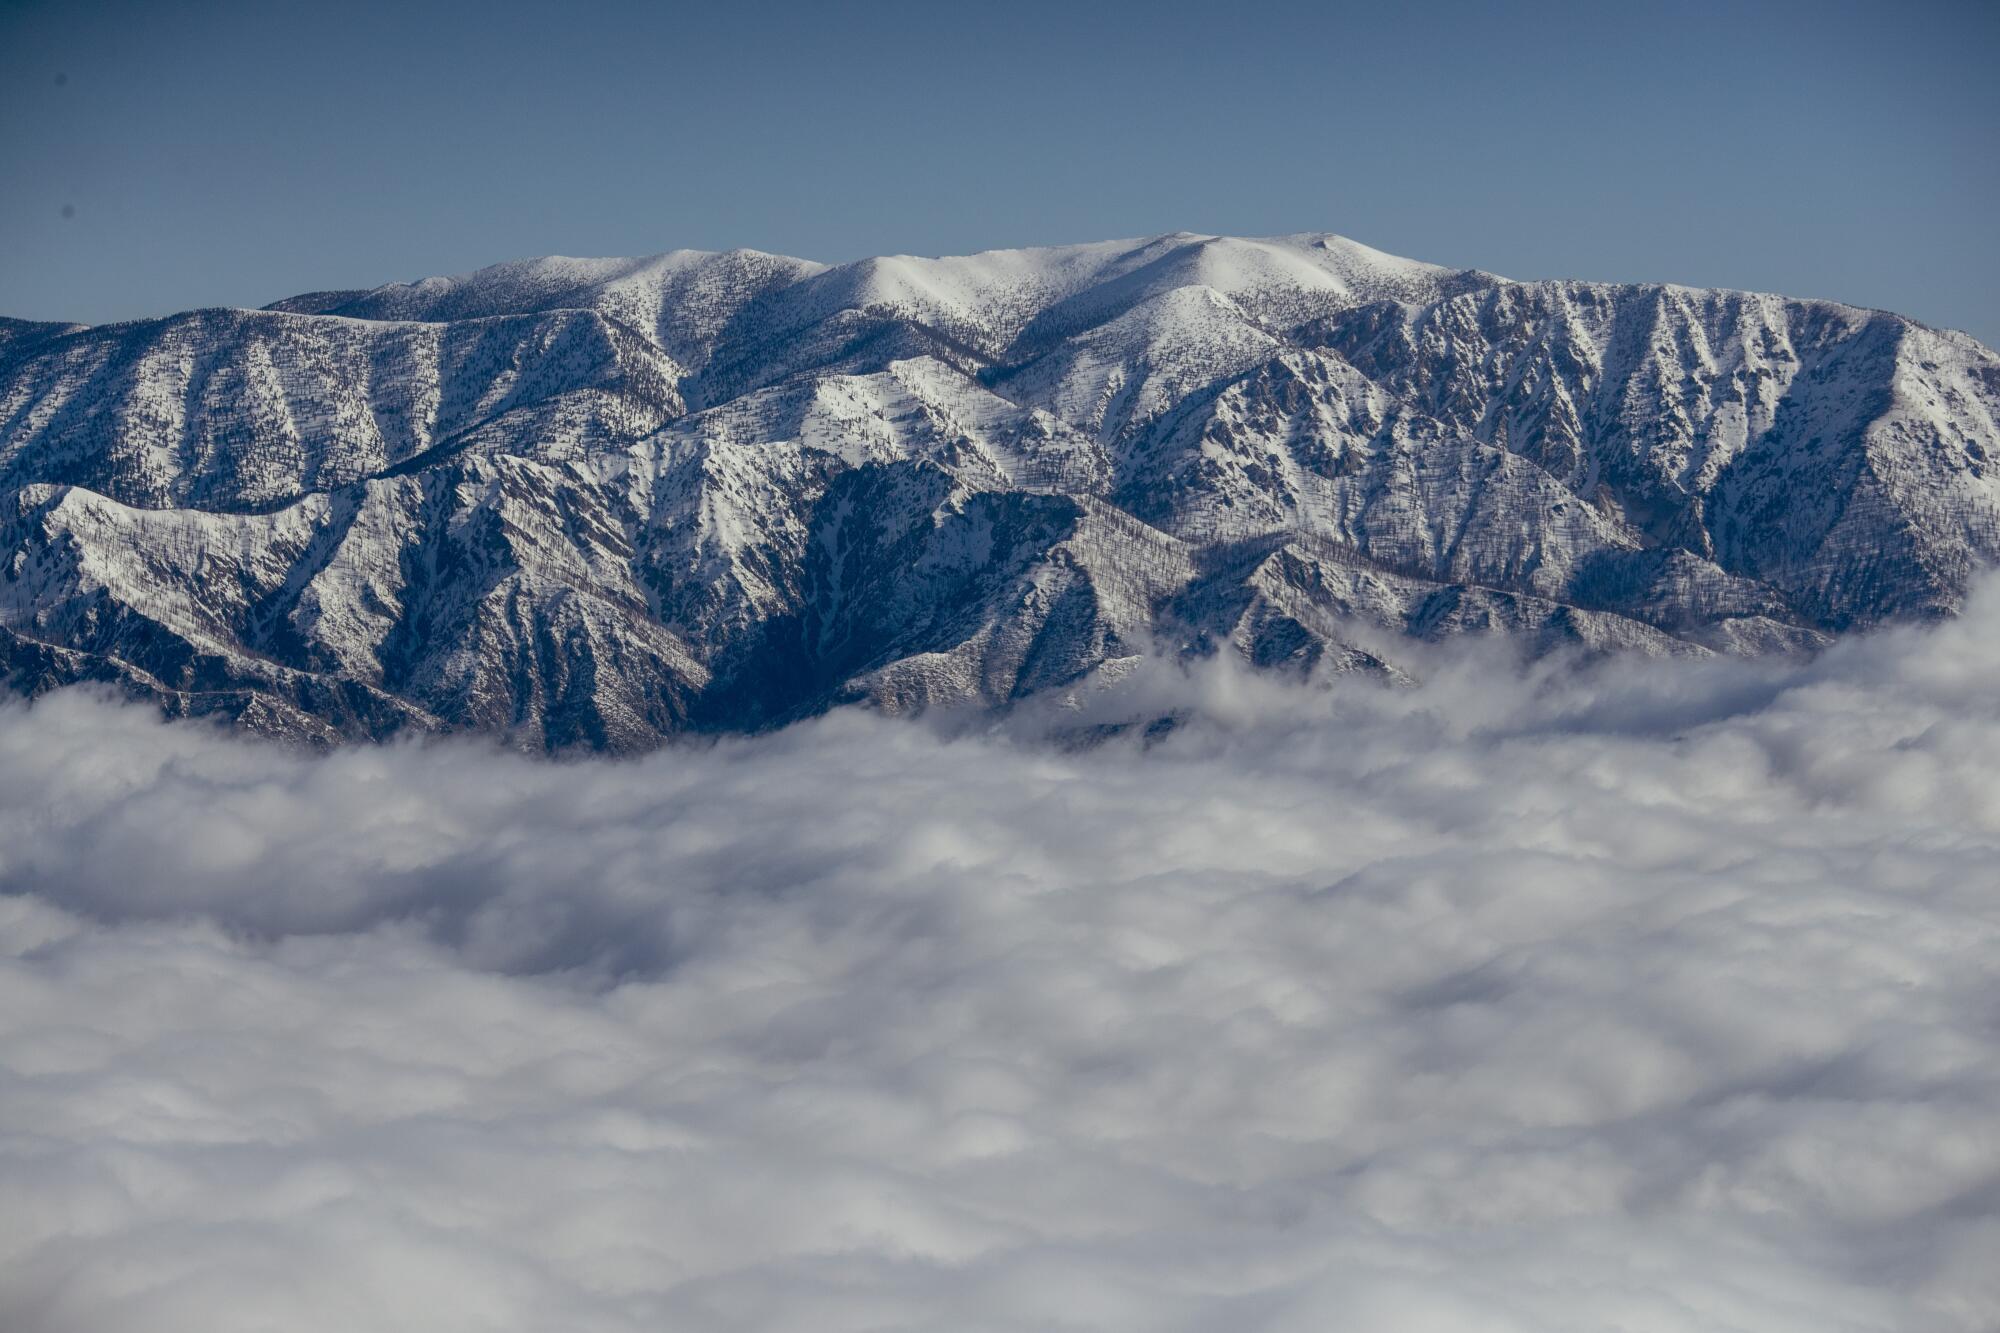 Snow-covered peaks of the San Bernardino Mountains rise above the clouds.